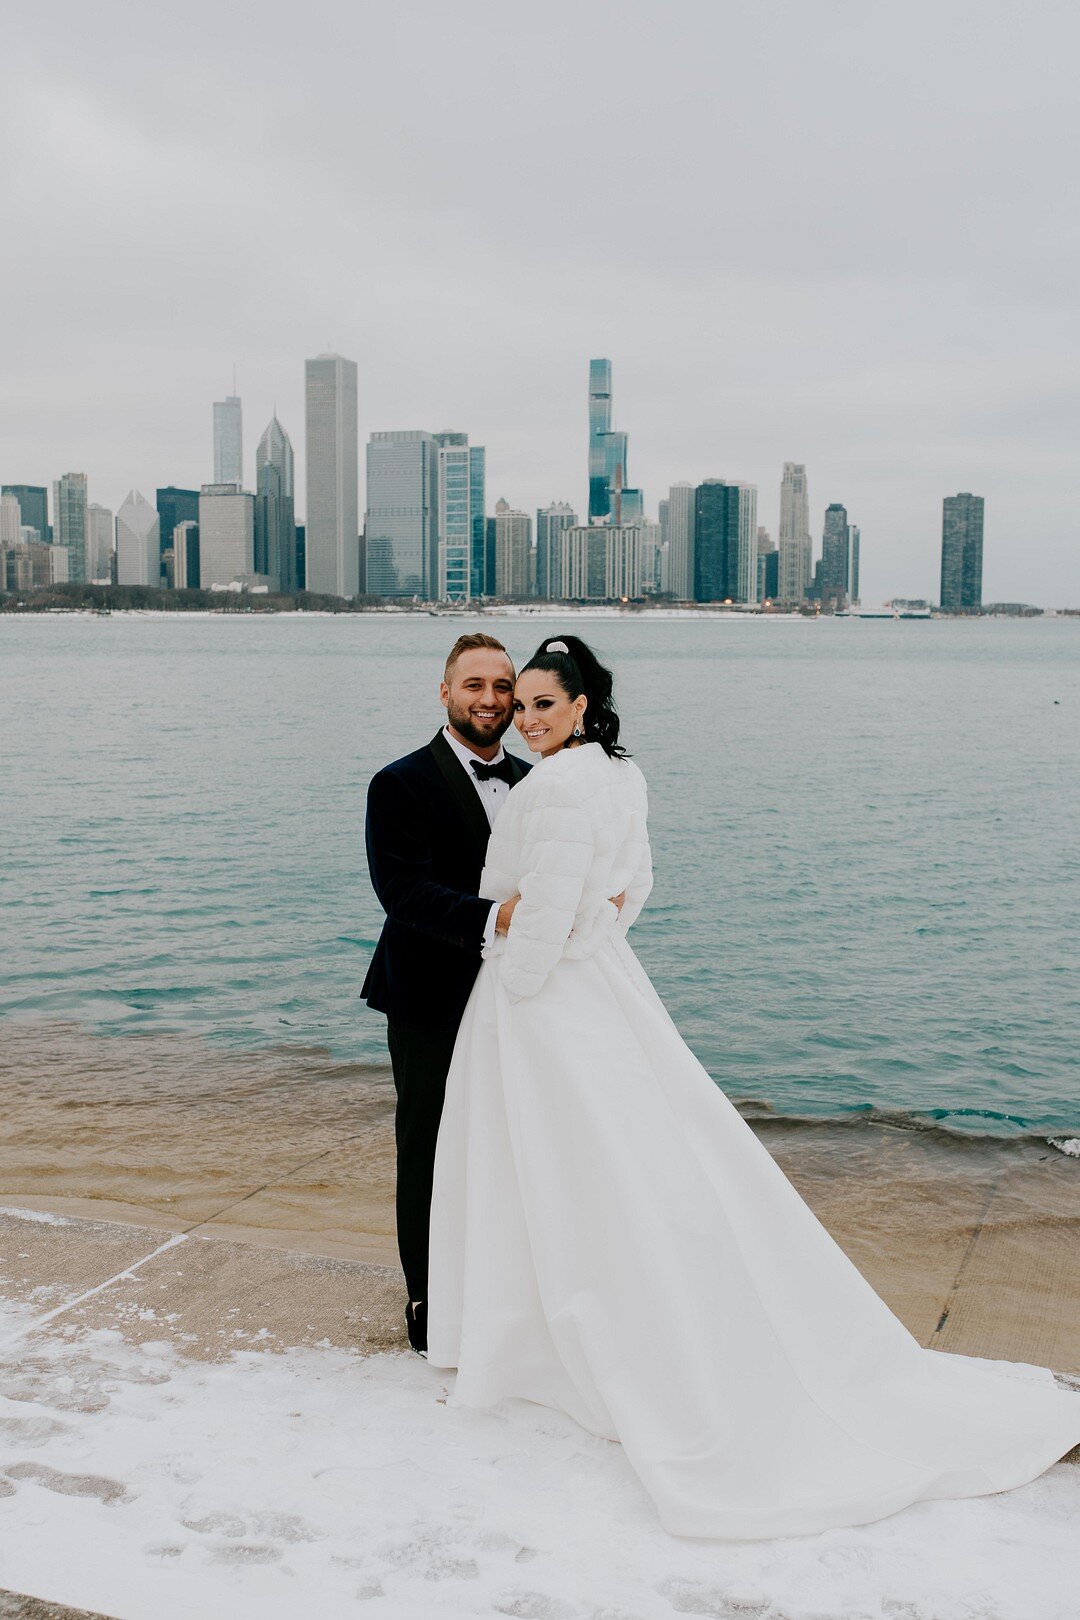 Elegant Yet Unique 19 East Wedding captured by Apaige Photography featured on CHI thee WED wedding blog.